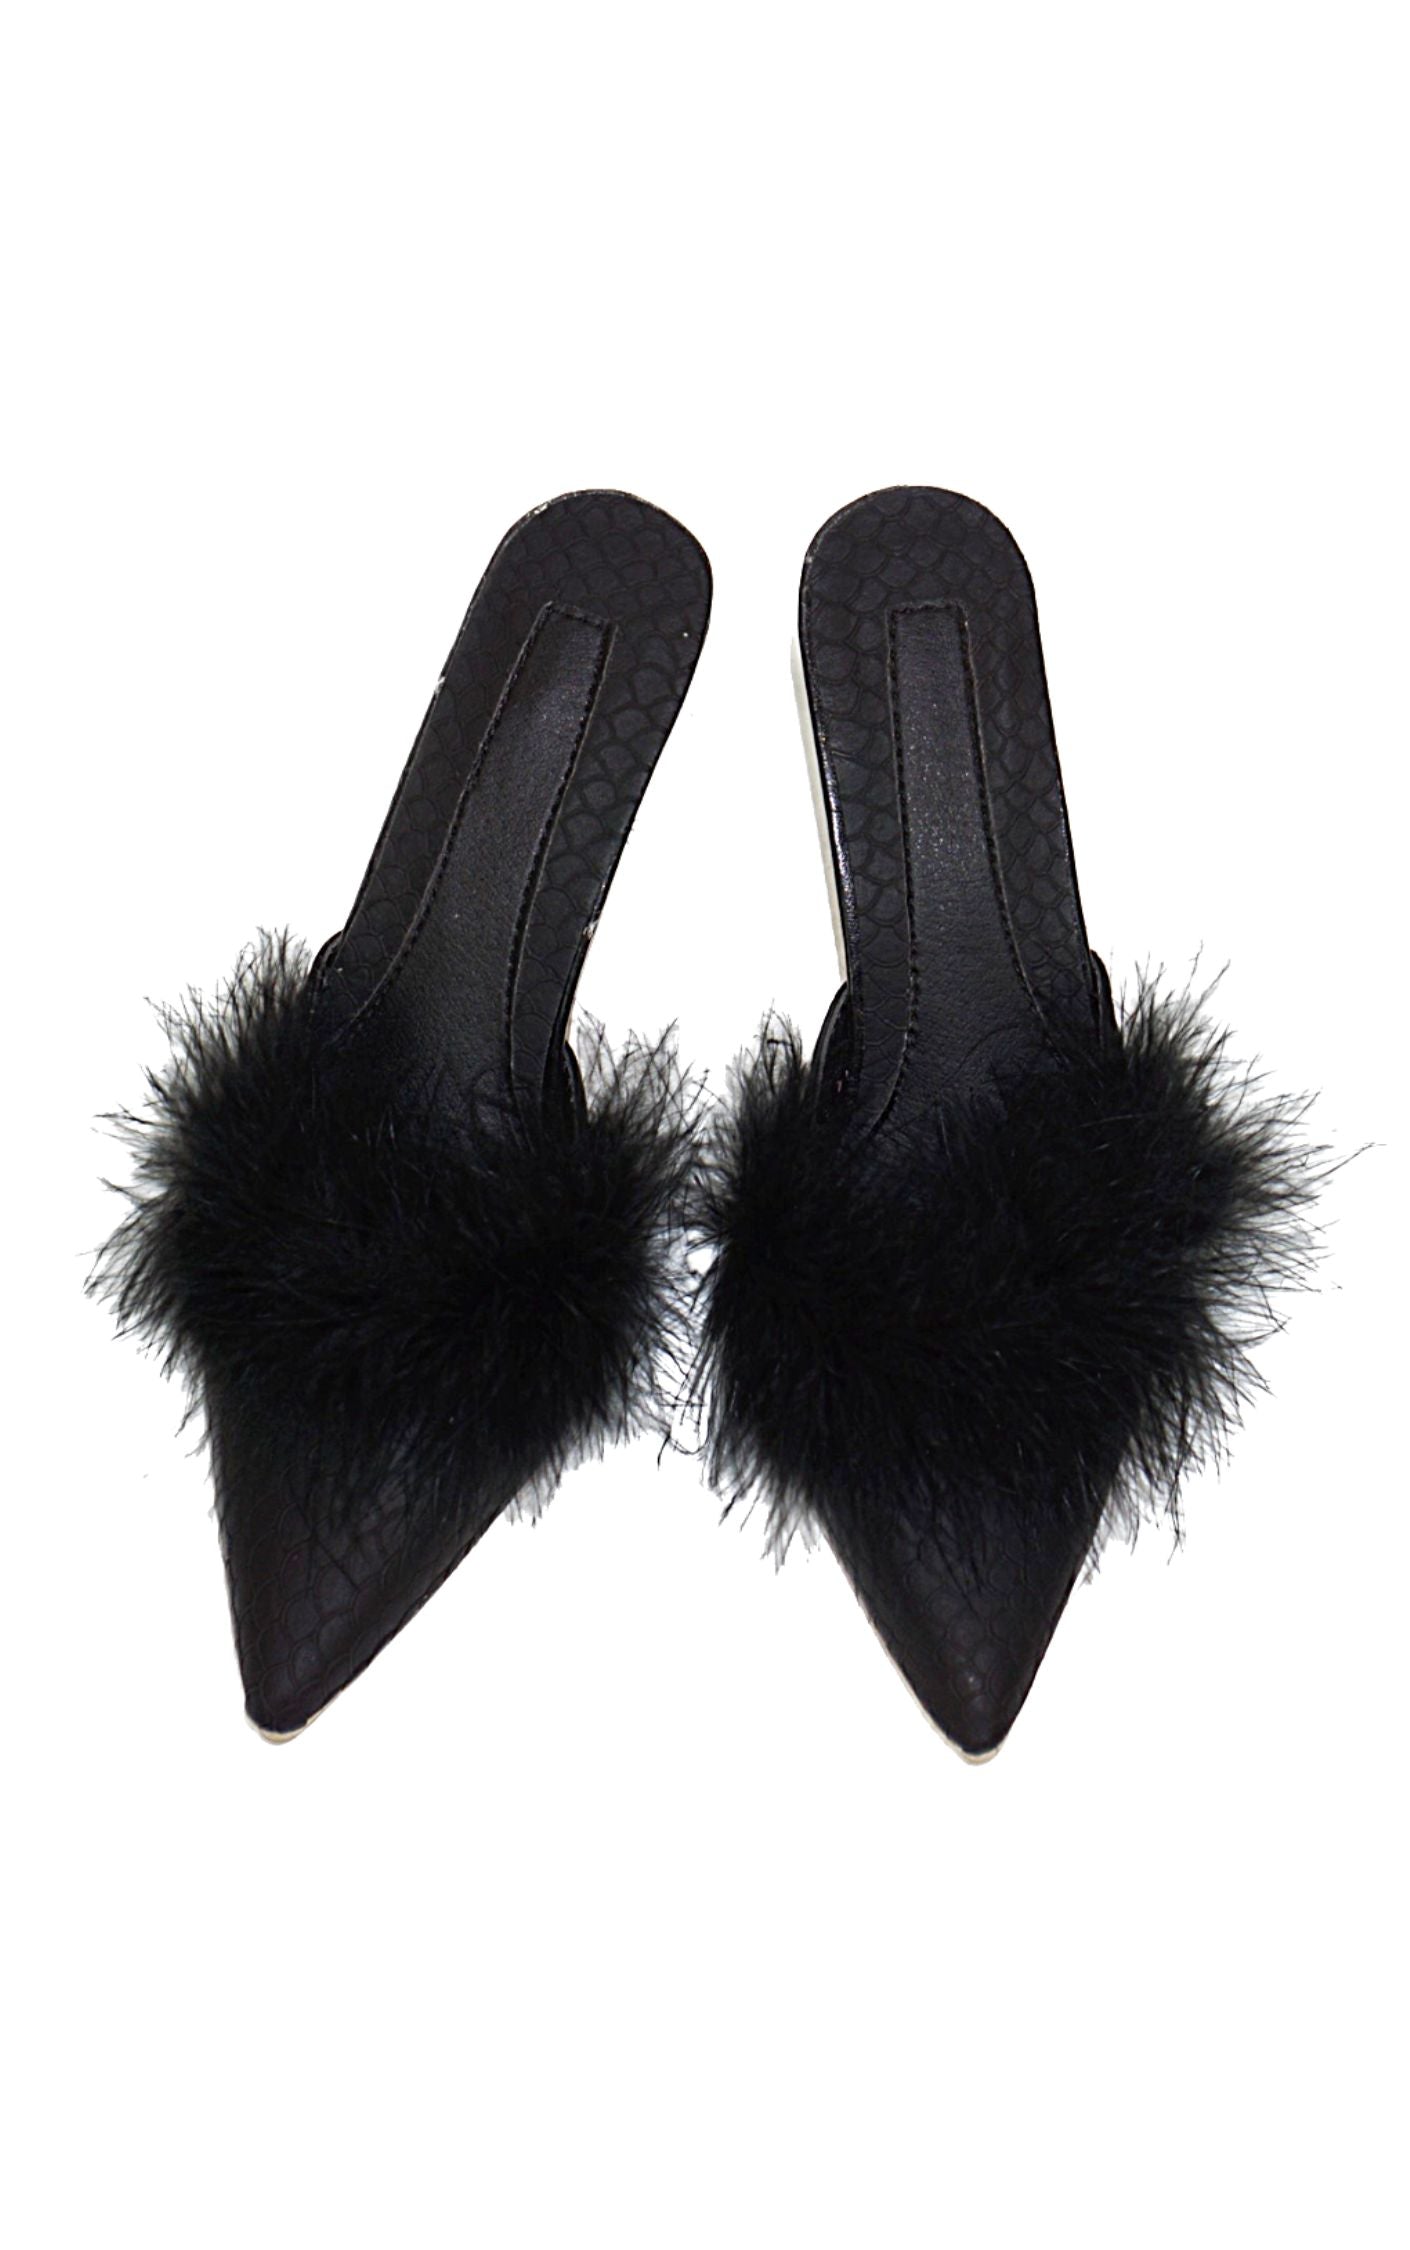 Black Feather Pointy Heeled Mules Sandals resellum